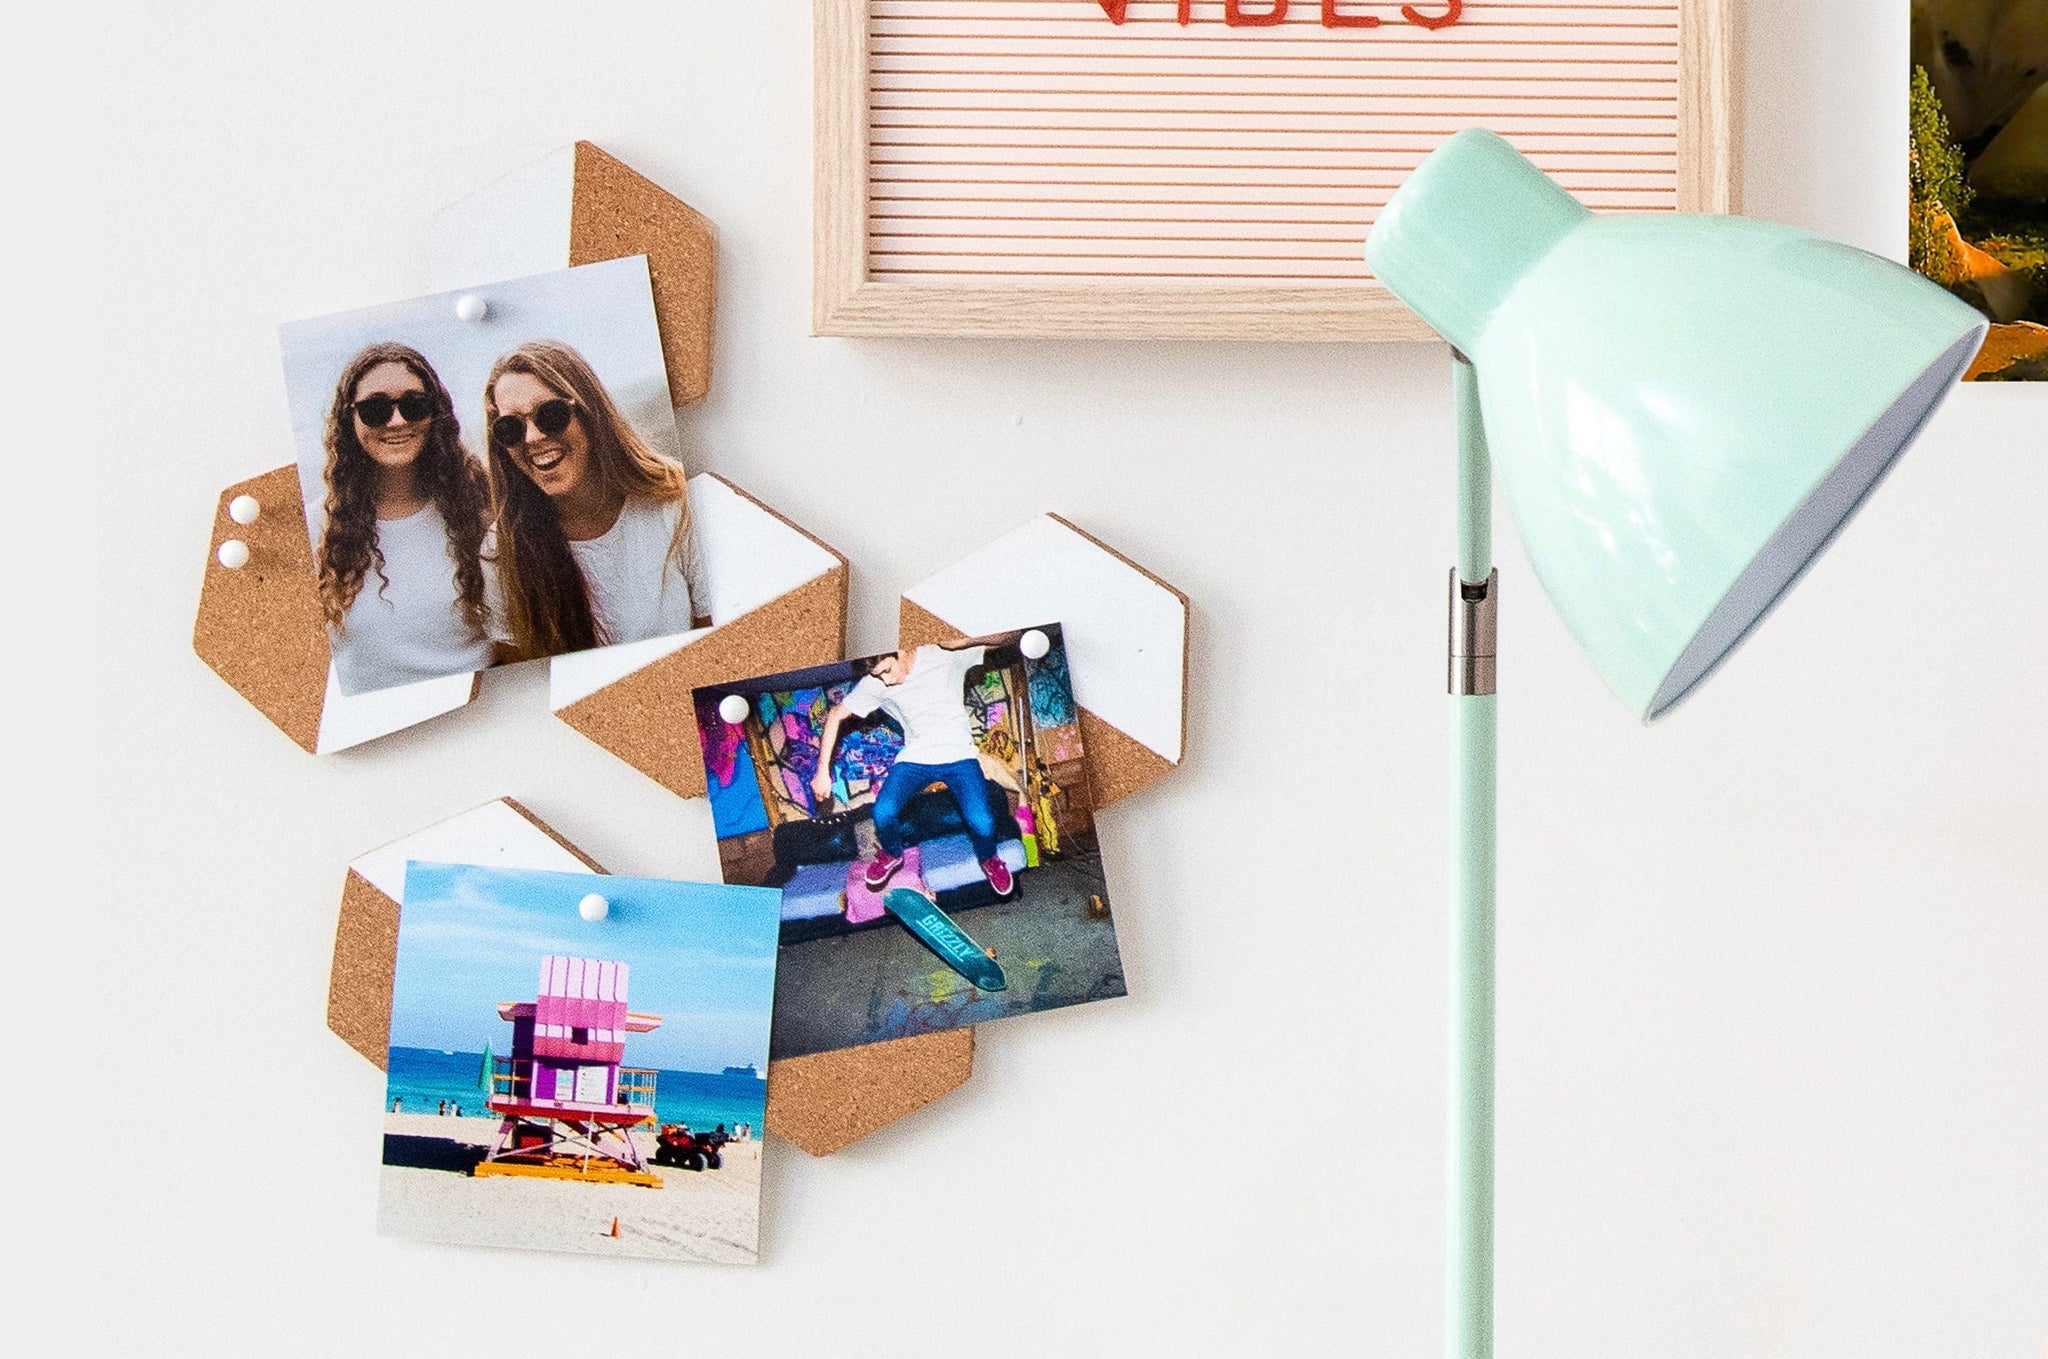 Lifestyle scene of three square Photo Prints tacked up on a wall next to a lamp and a letterboard. The Photo Prints feature pictures of teens and one photo of the beach.